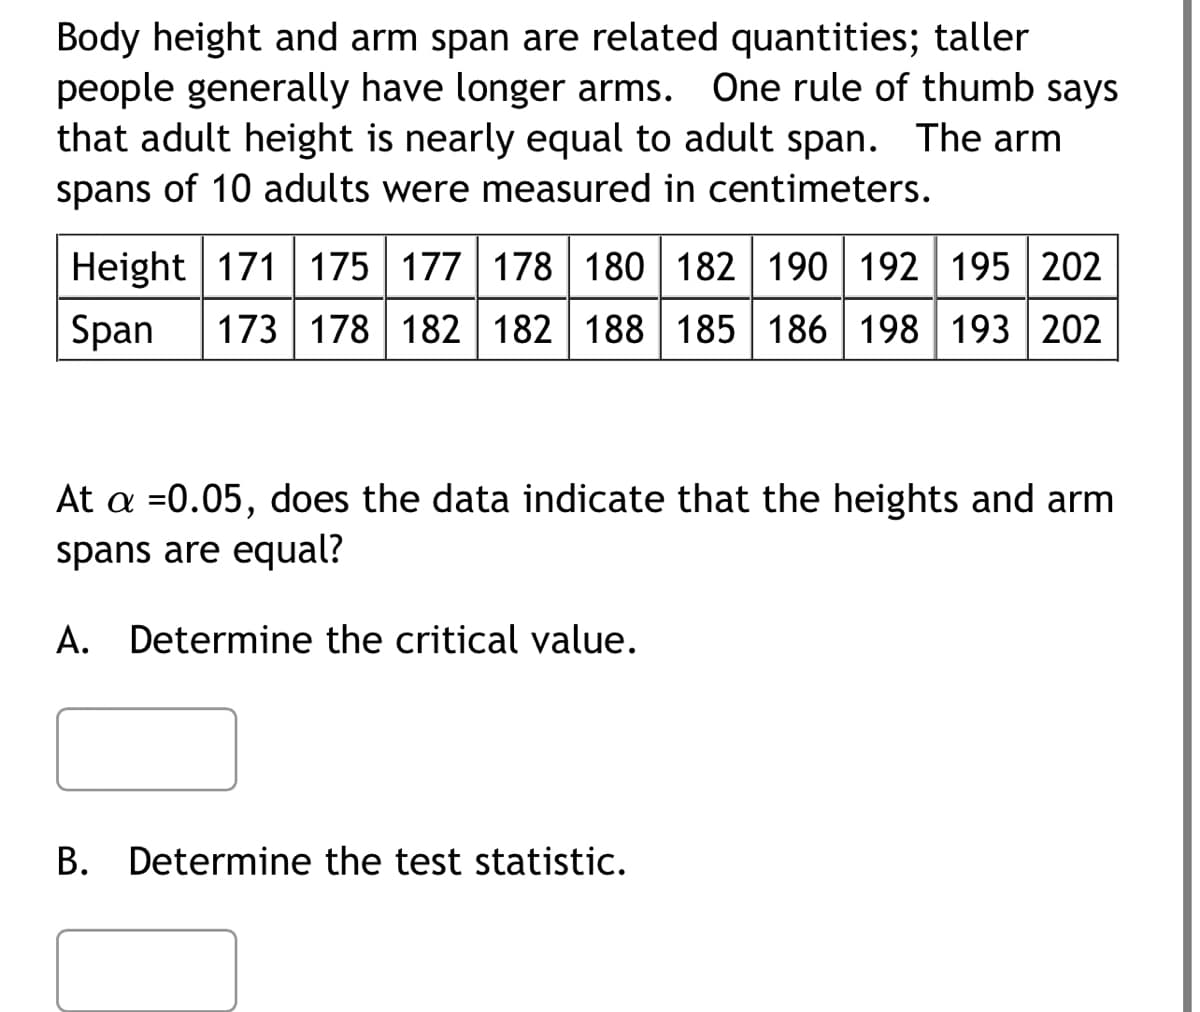 Body height and arm span are related quantities; taller
people generally have longer arms. One rule of thumb says
that adult height is nearly equal to adult span. The arm
spans of 10 adults were measured in centimeters.
Height 171 175 177 178 180 182 190 192 195 202
Span 173 178 182 182 188 185 186 198 193 202
At a =0.05, does the data indicate that the heights and arm
spans are equal?
A. Determine the critical value.
B. Determine the test statistic.